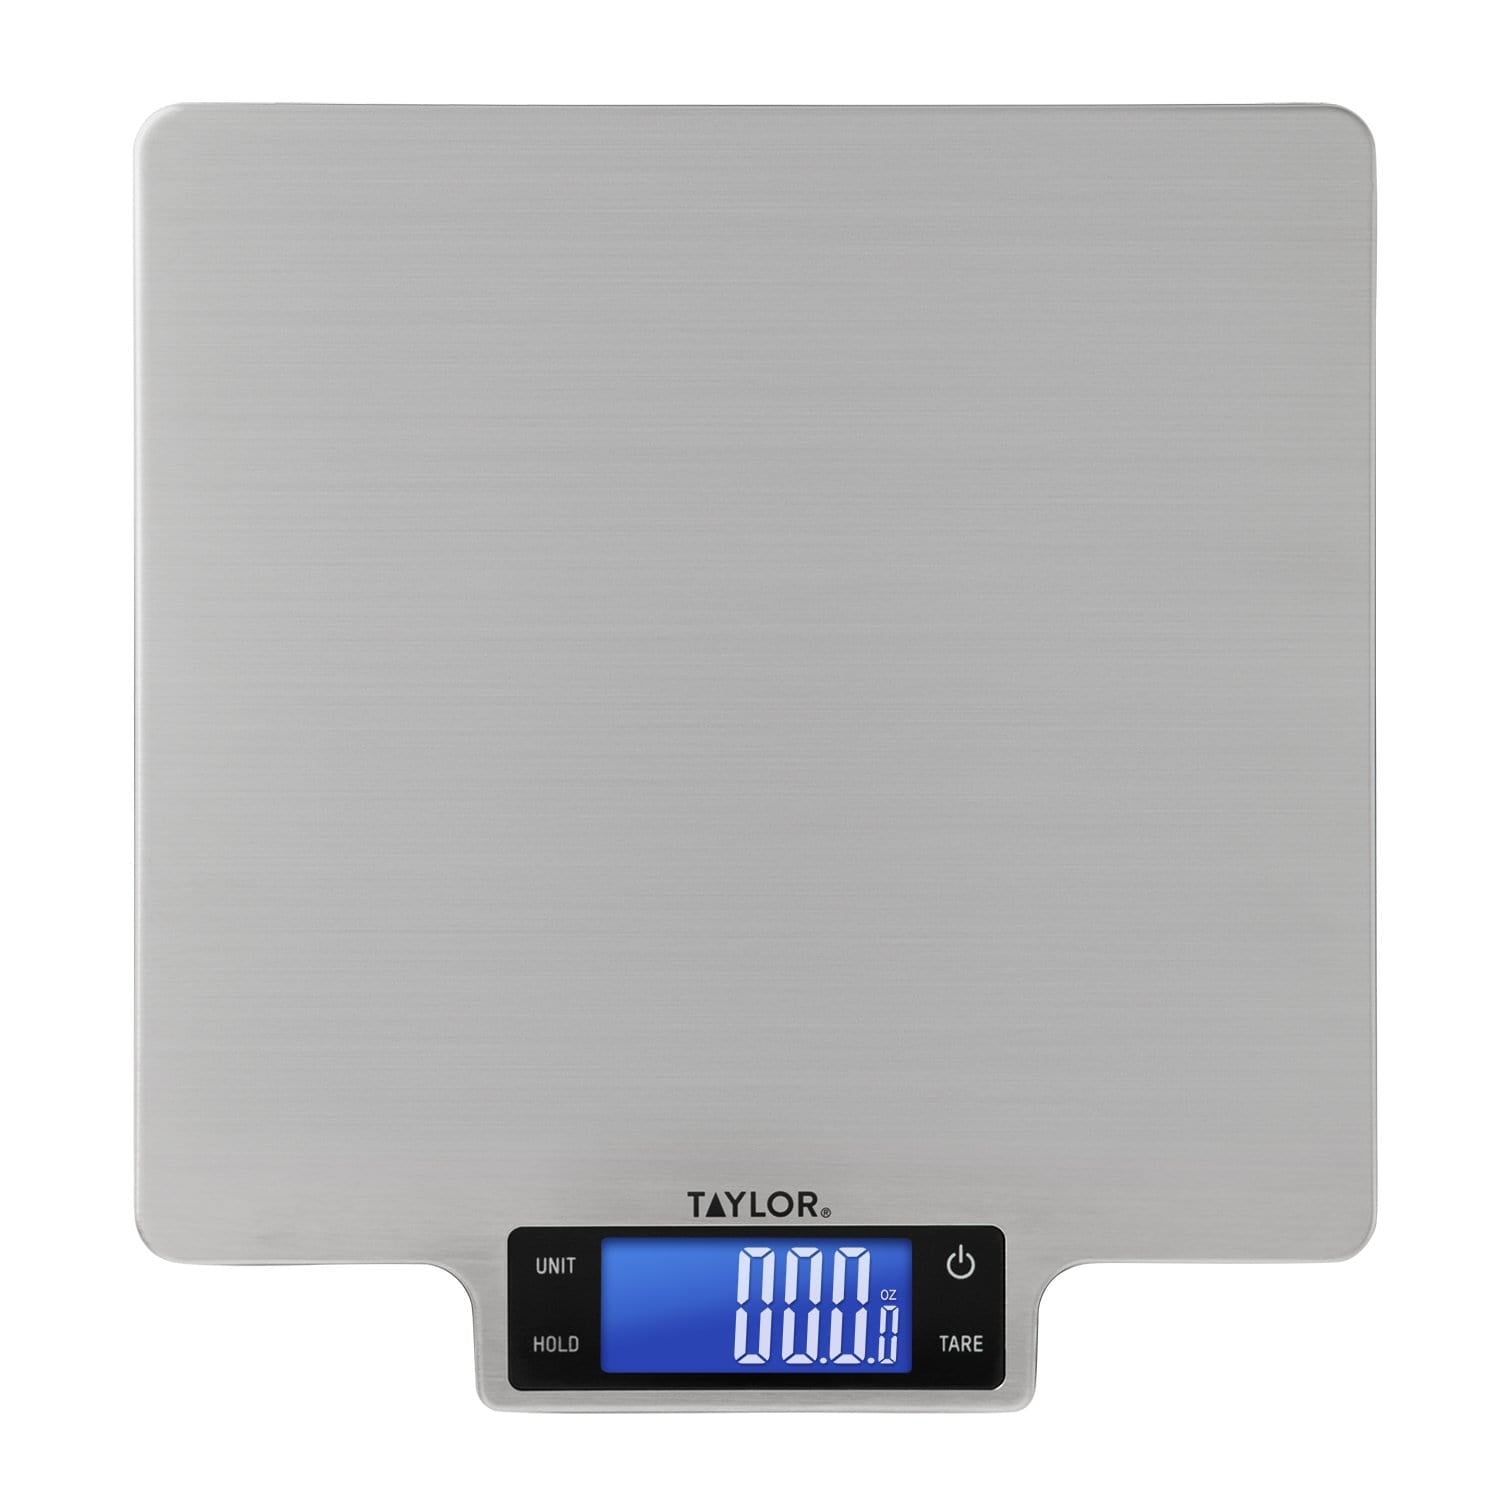 High Capacity Kitchen Scale - A Premium Food Scale That Weighs in Grams &  Ounces w/a 22 Pound Capacity, Feat. a Hi-Def LCD Screen and Stainless  Steel Platform